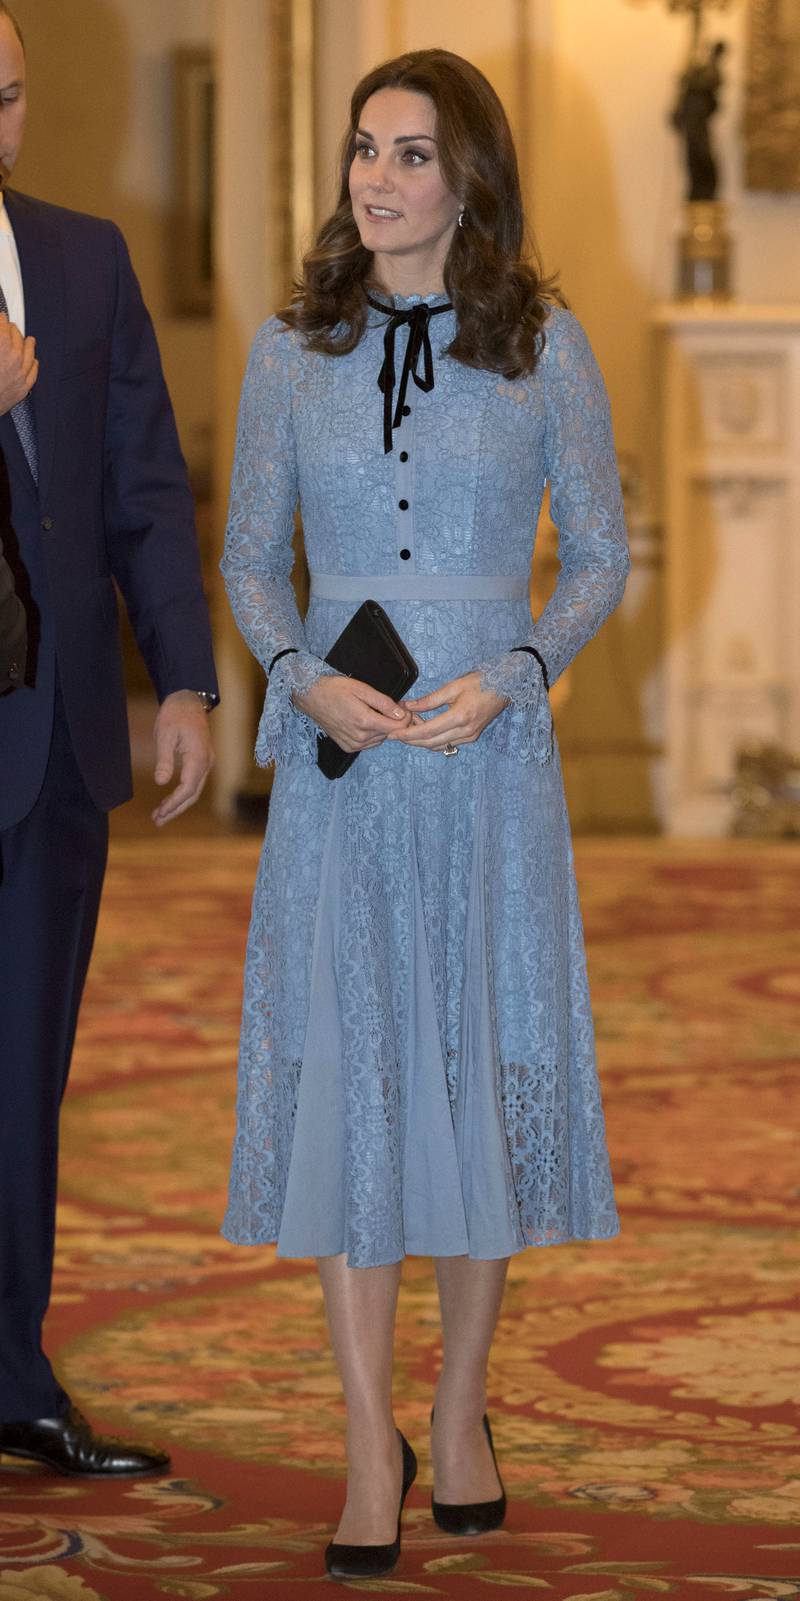 Catherine, Duchess of Cambridge, in blue lace Temperley London, attends a World Mental Health Day reception at Buckingham Palace in London on October 10, 2017. Getty Images